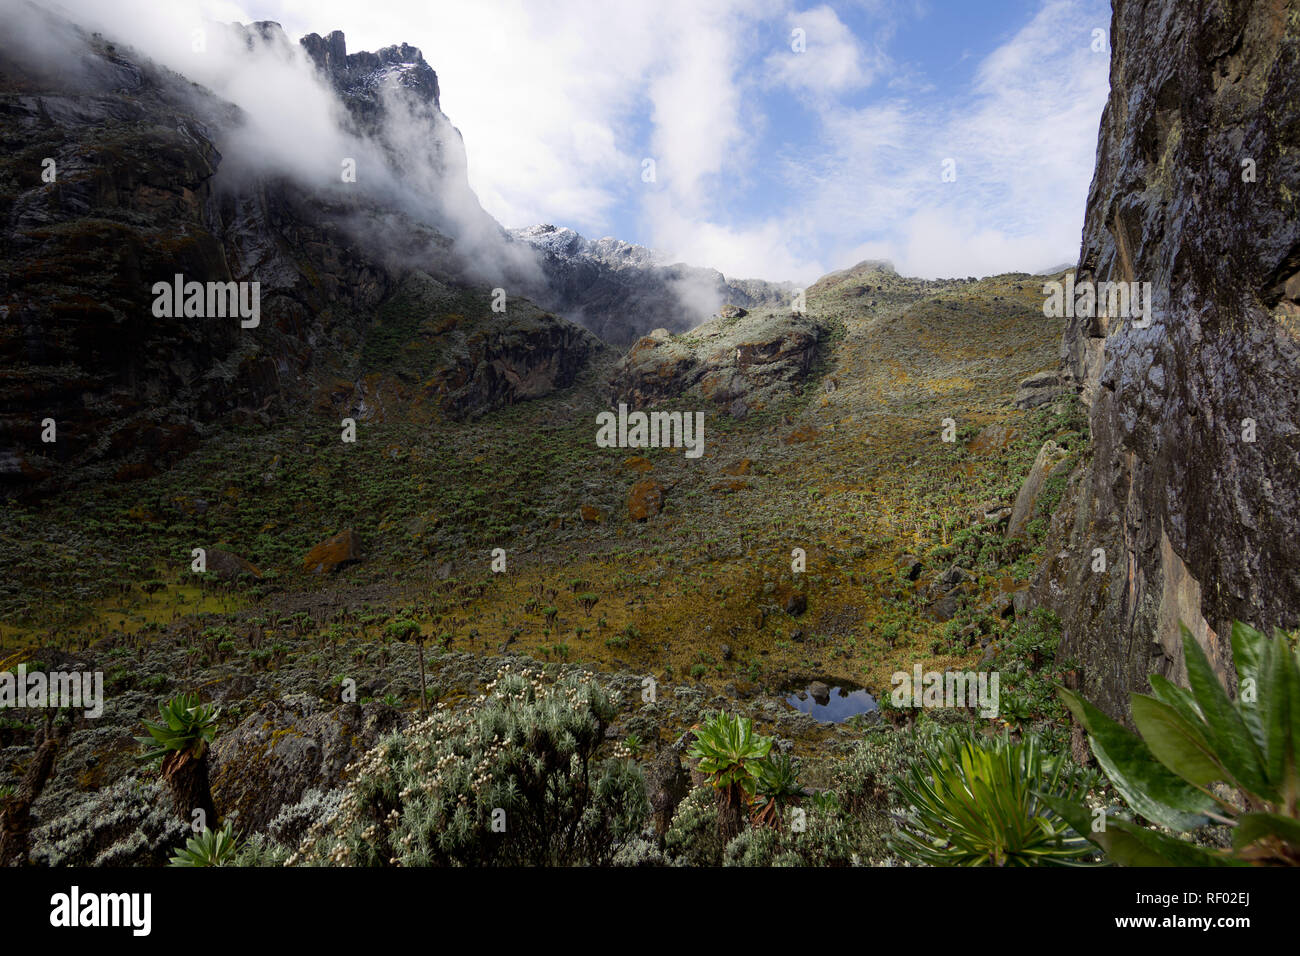 On day 6 of the Kilembe Route, after summiting Mount Stanley, hikers descend to lower elevaiton in Rwenzori National Park, Uganda past pretty scenery Stock Photo